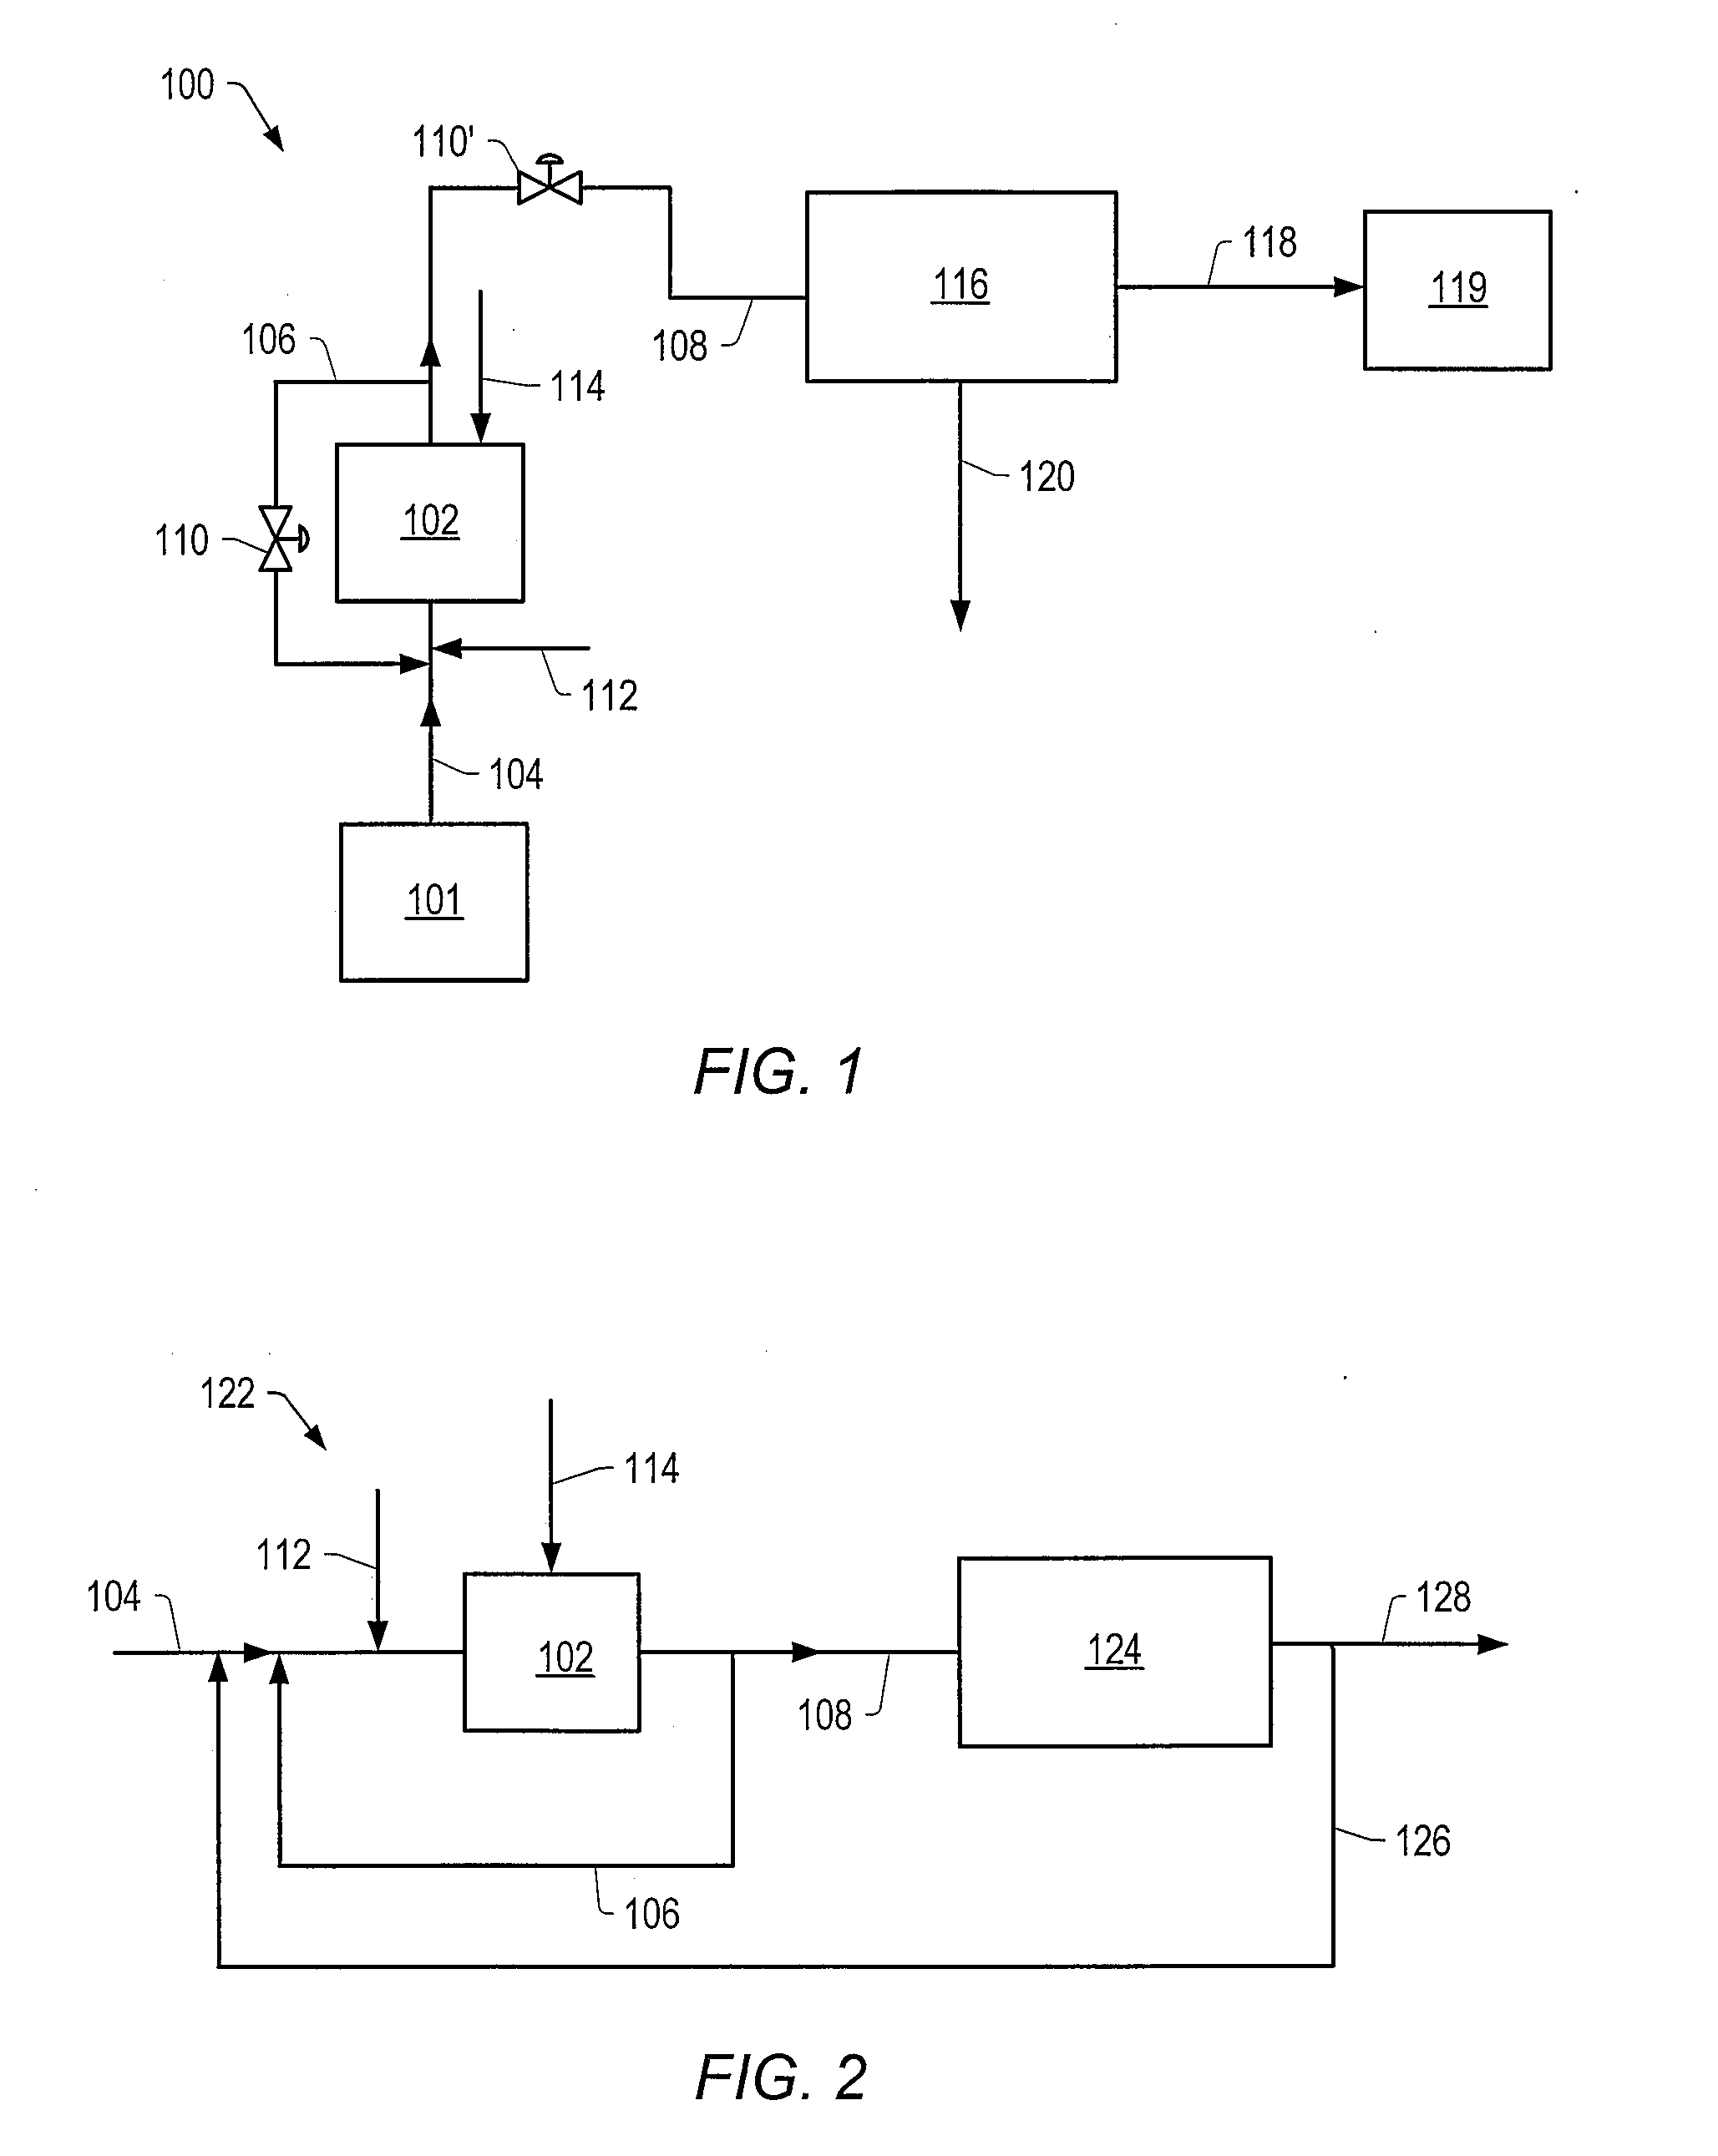 Methods for producing a total product at selected temperatures